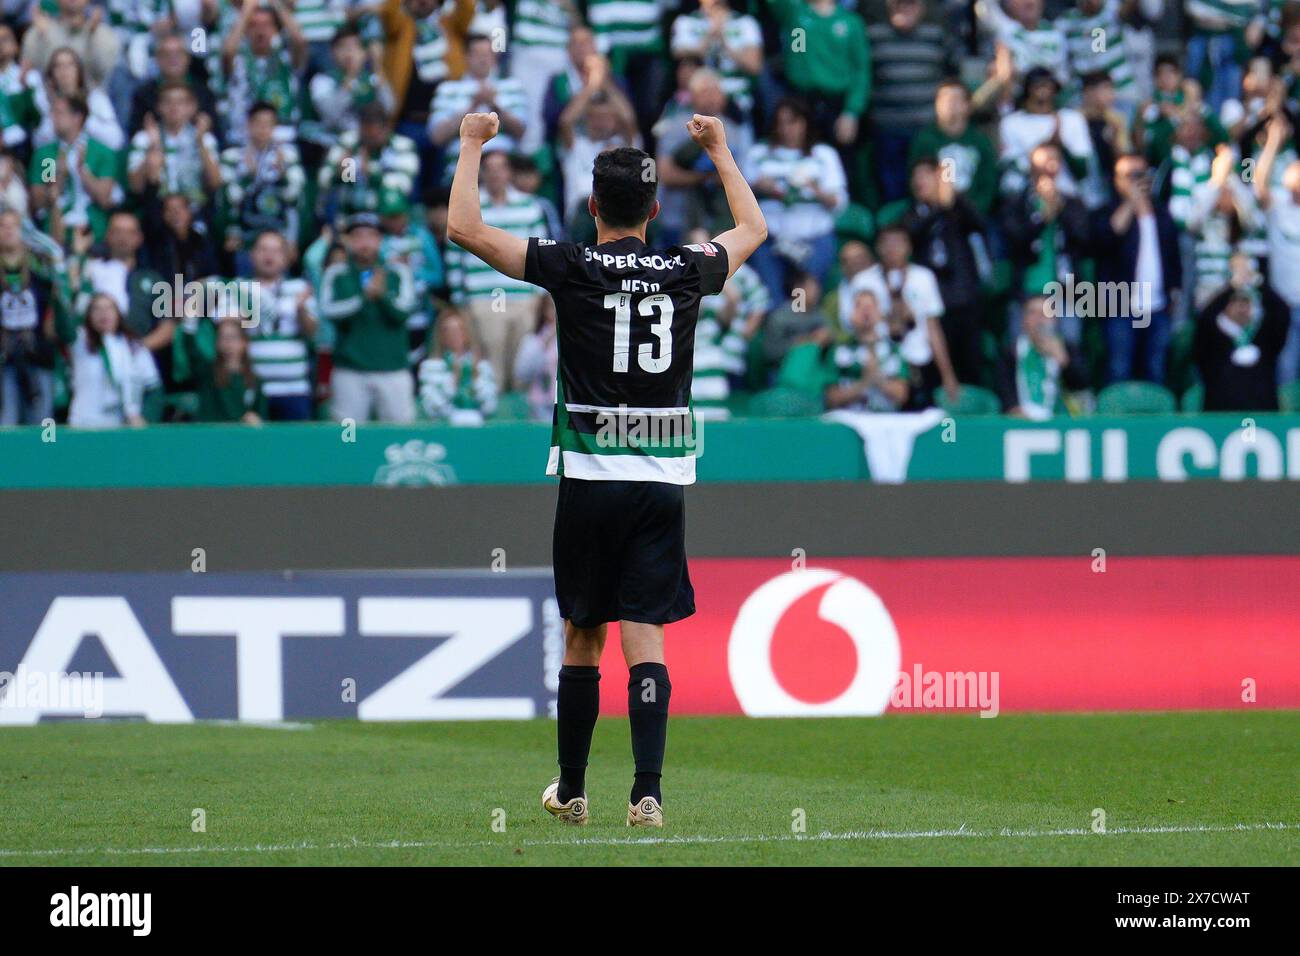 Luis Neto of Sporting CP gestures during Liga Portugal BWIN football match between Sporting CP and GD Chaves at Estadio Jose Alvalade.Final match of Liga Portugal BWIN where Sporting CP received the trophy of Portugues League Champions. Final score: Sporting CP 3:0 GD Chaves. Stock Photo